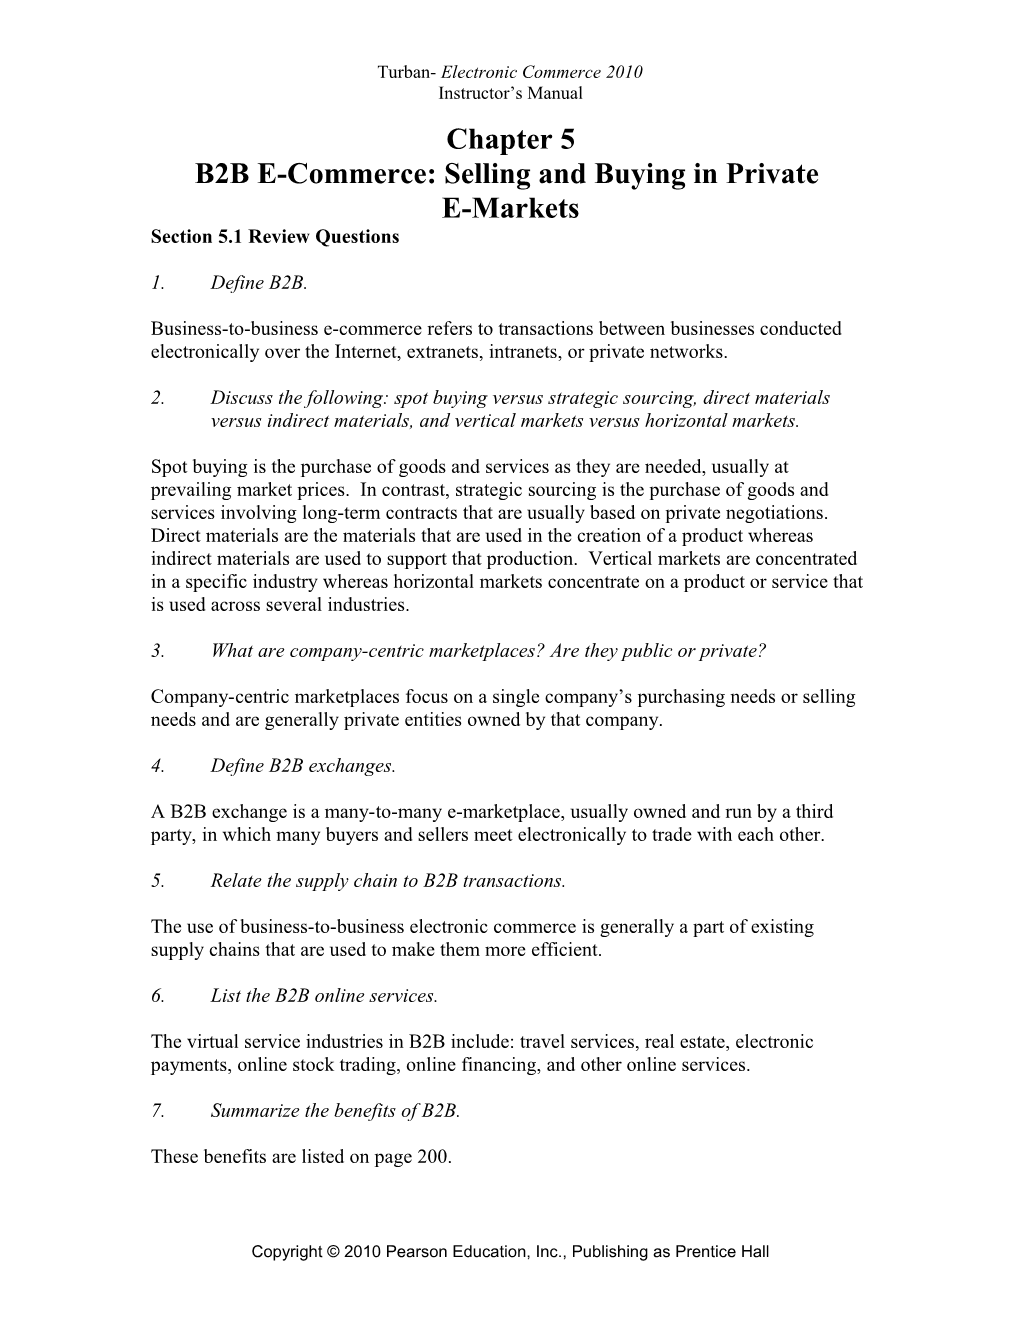 B2B E-Commerce: Selling and Buying in Private